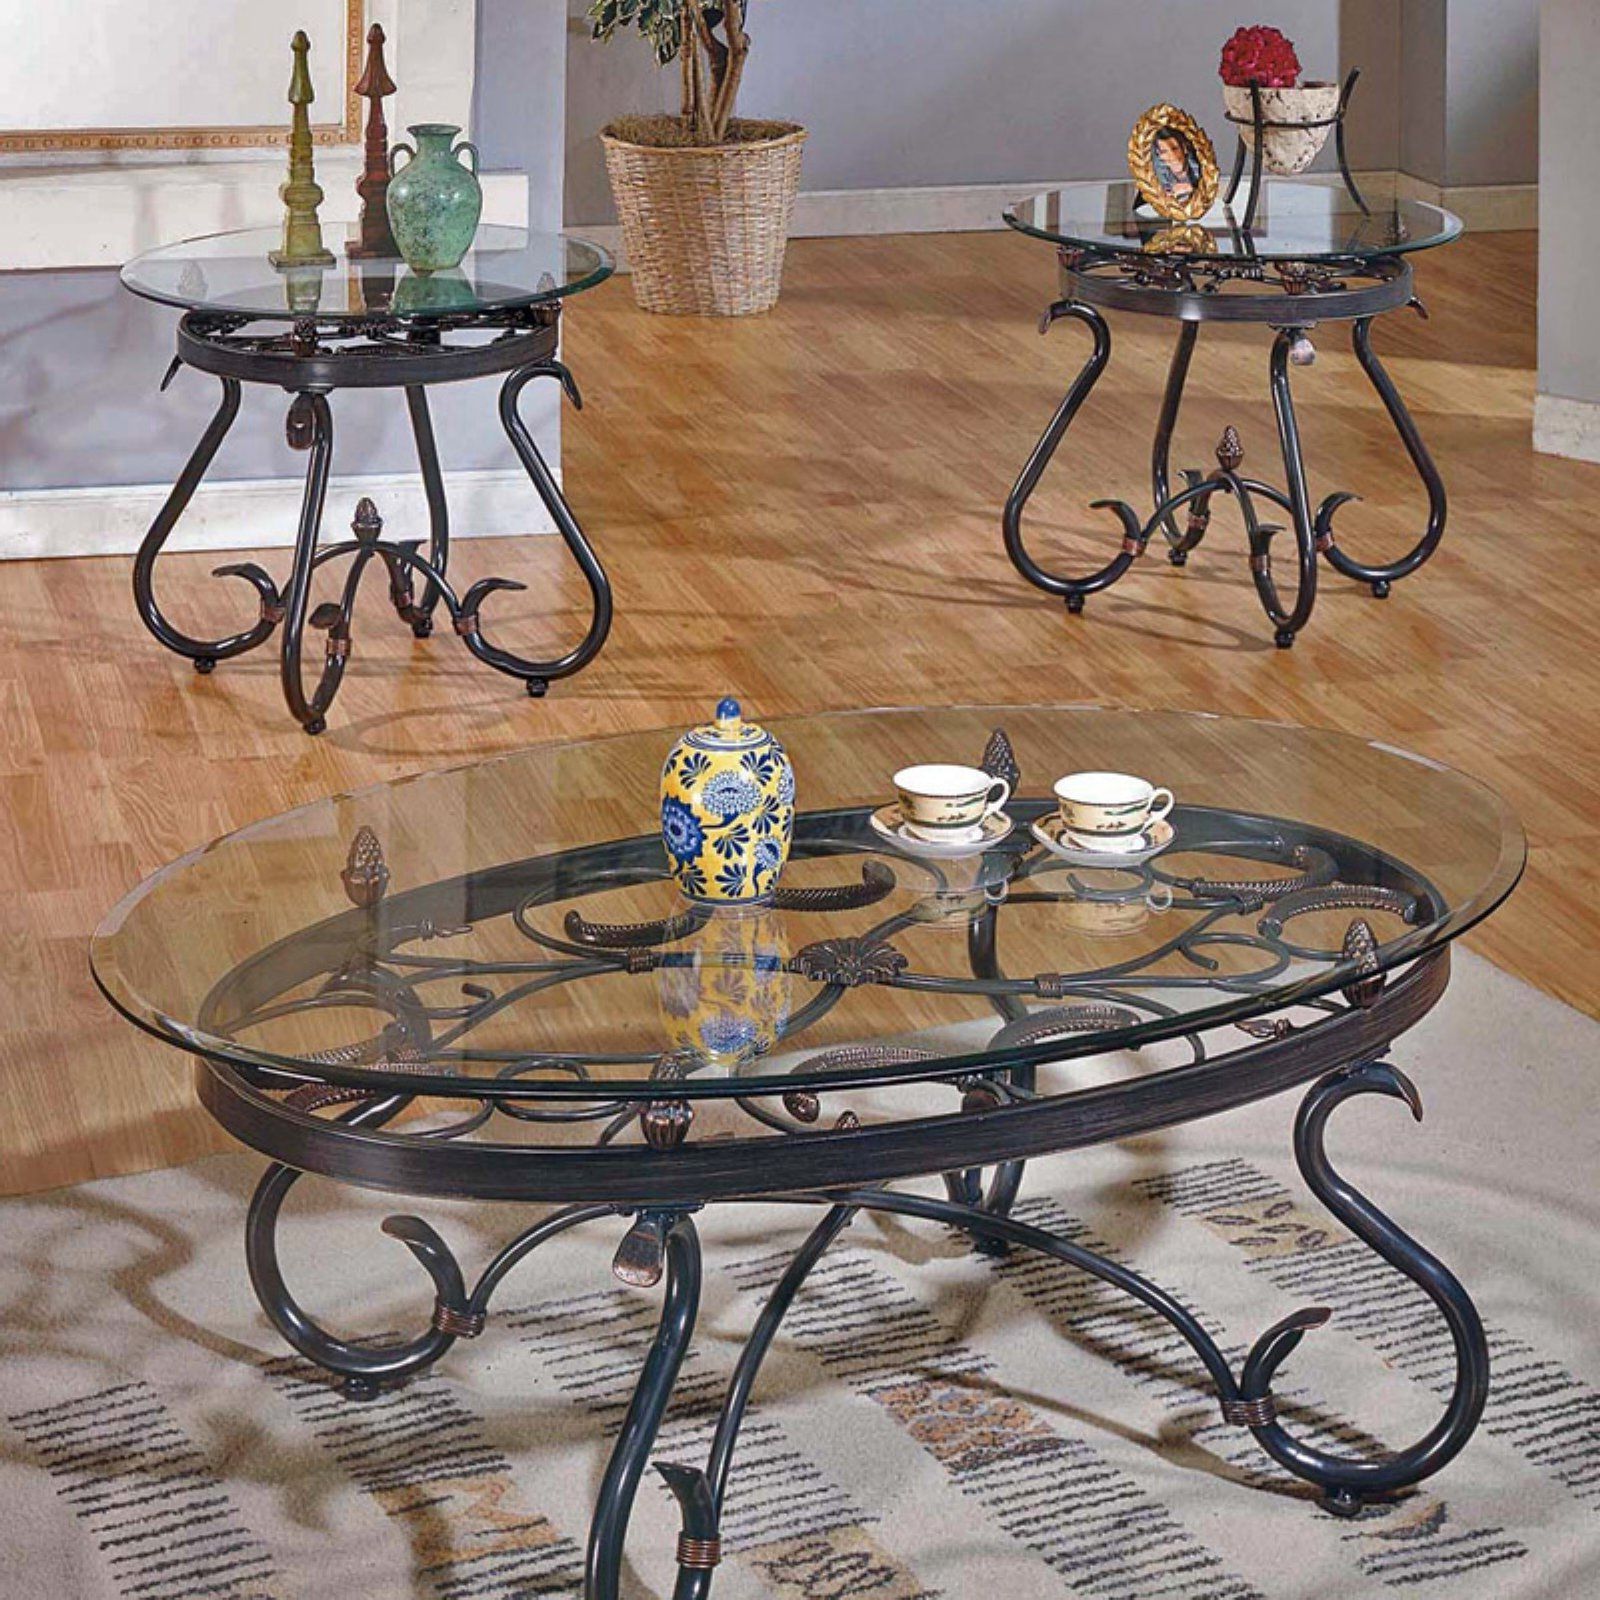 3 Piece Coffee Table Within Most Popular 3 Piece Coffee Tables (Gallery 7 of 20)